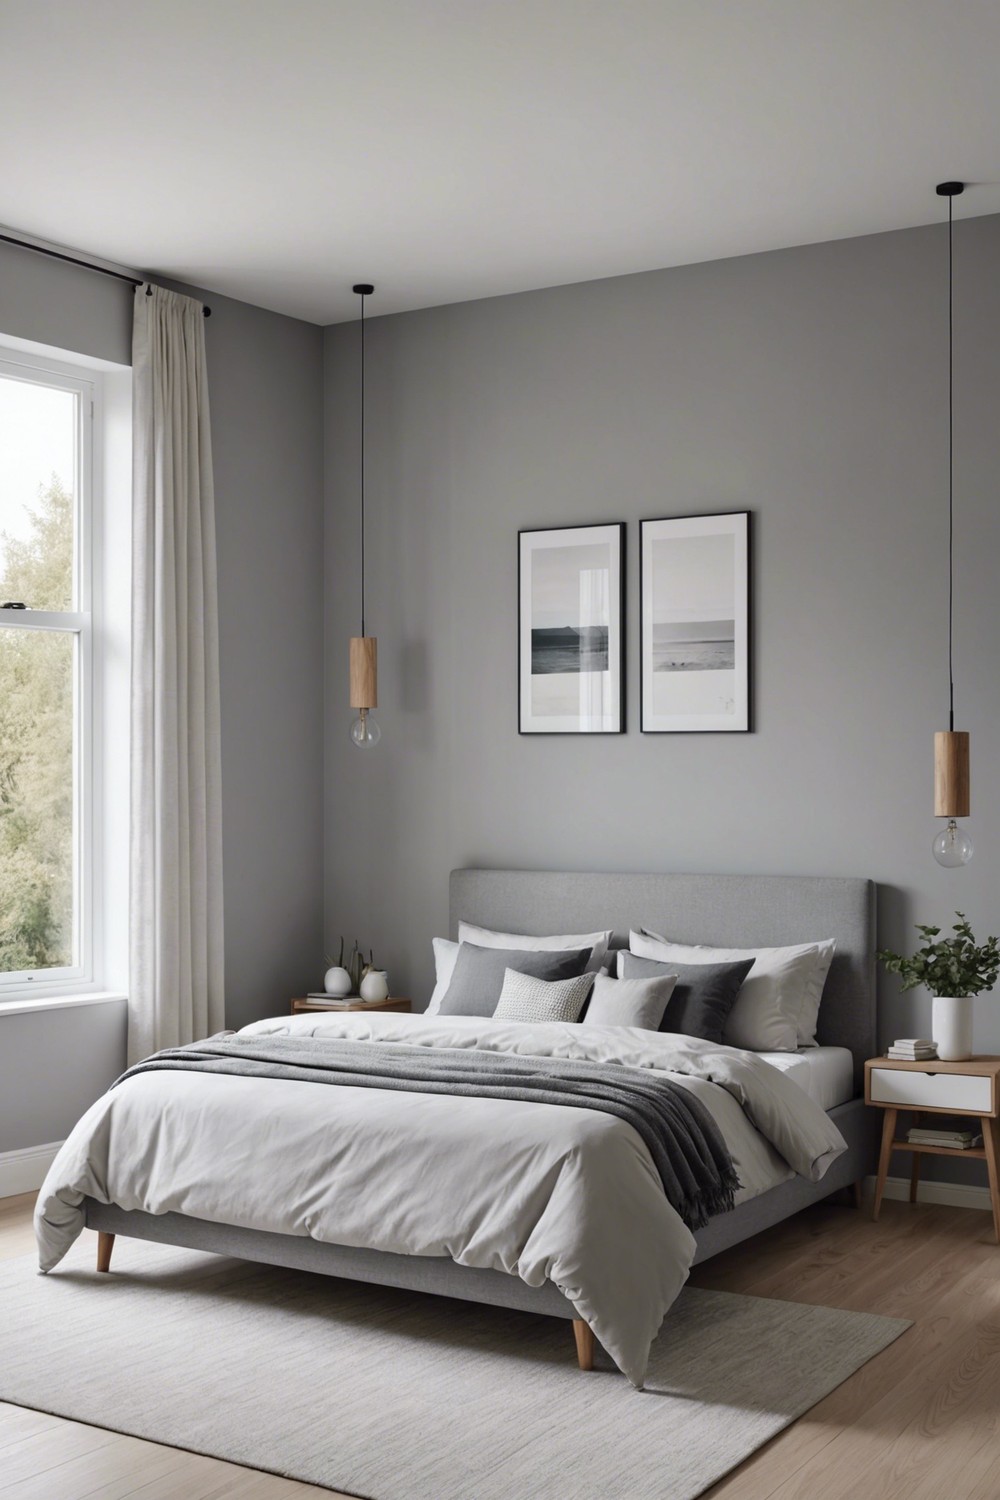 Soft Grey Walls with White Accents